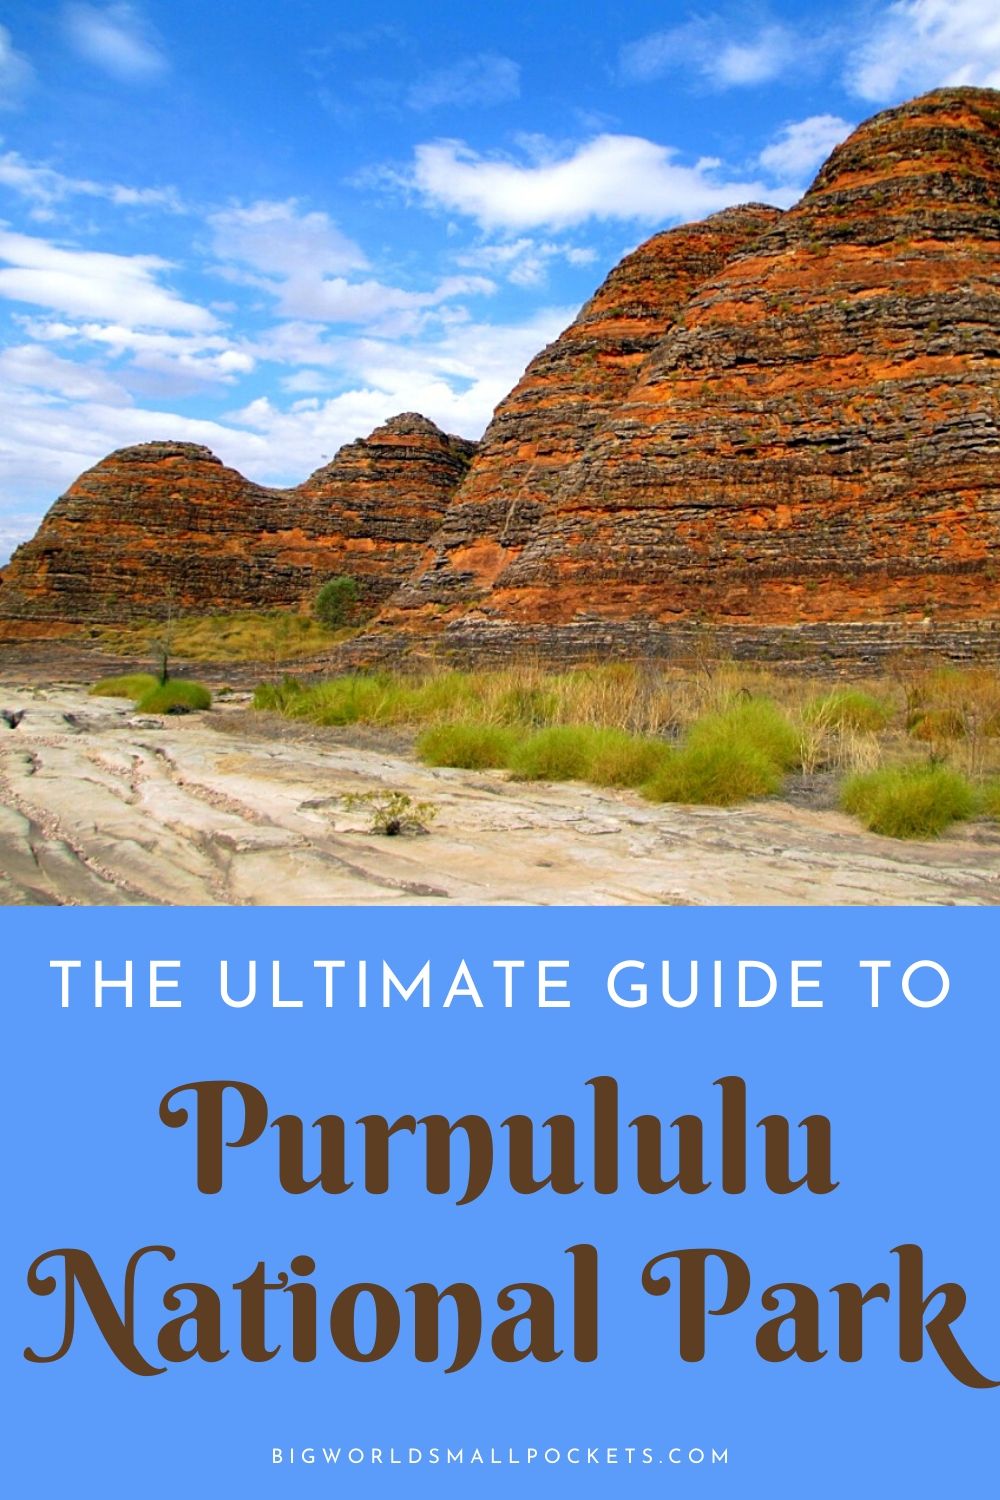 The Ultimate Guide to Purnululu National Park